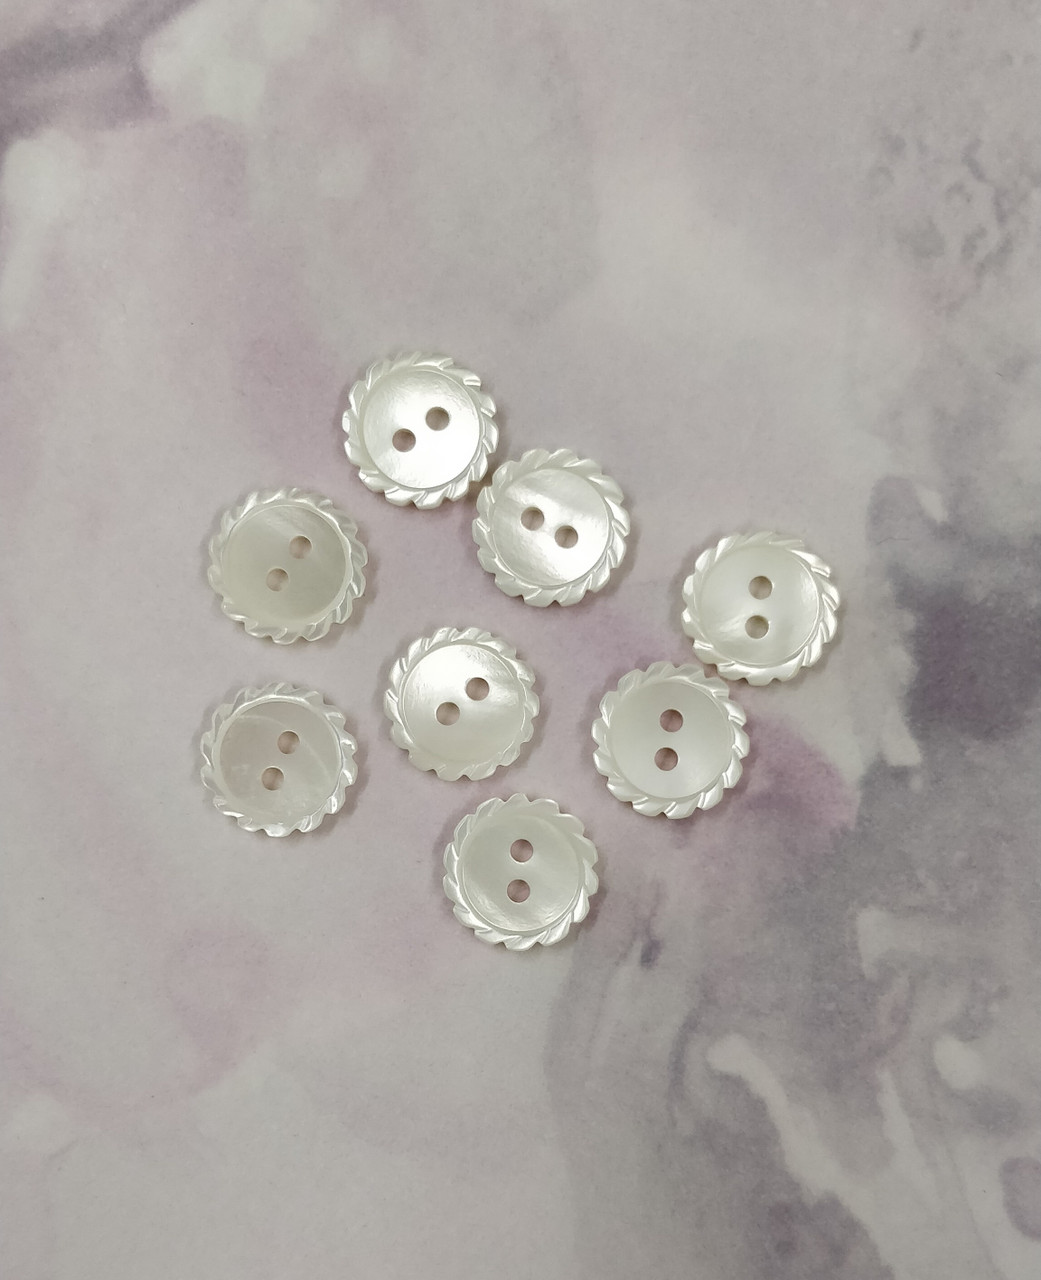 Beautiful mother of pearl buttons, Ideal for all your sewing projects
Wavy edge design with 2 holes, Size 16 (10 mm), Priced per button